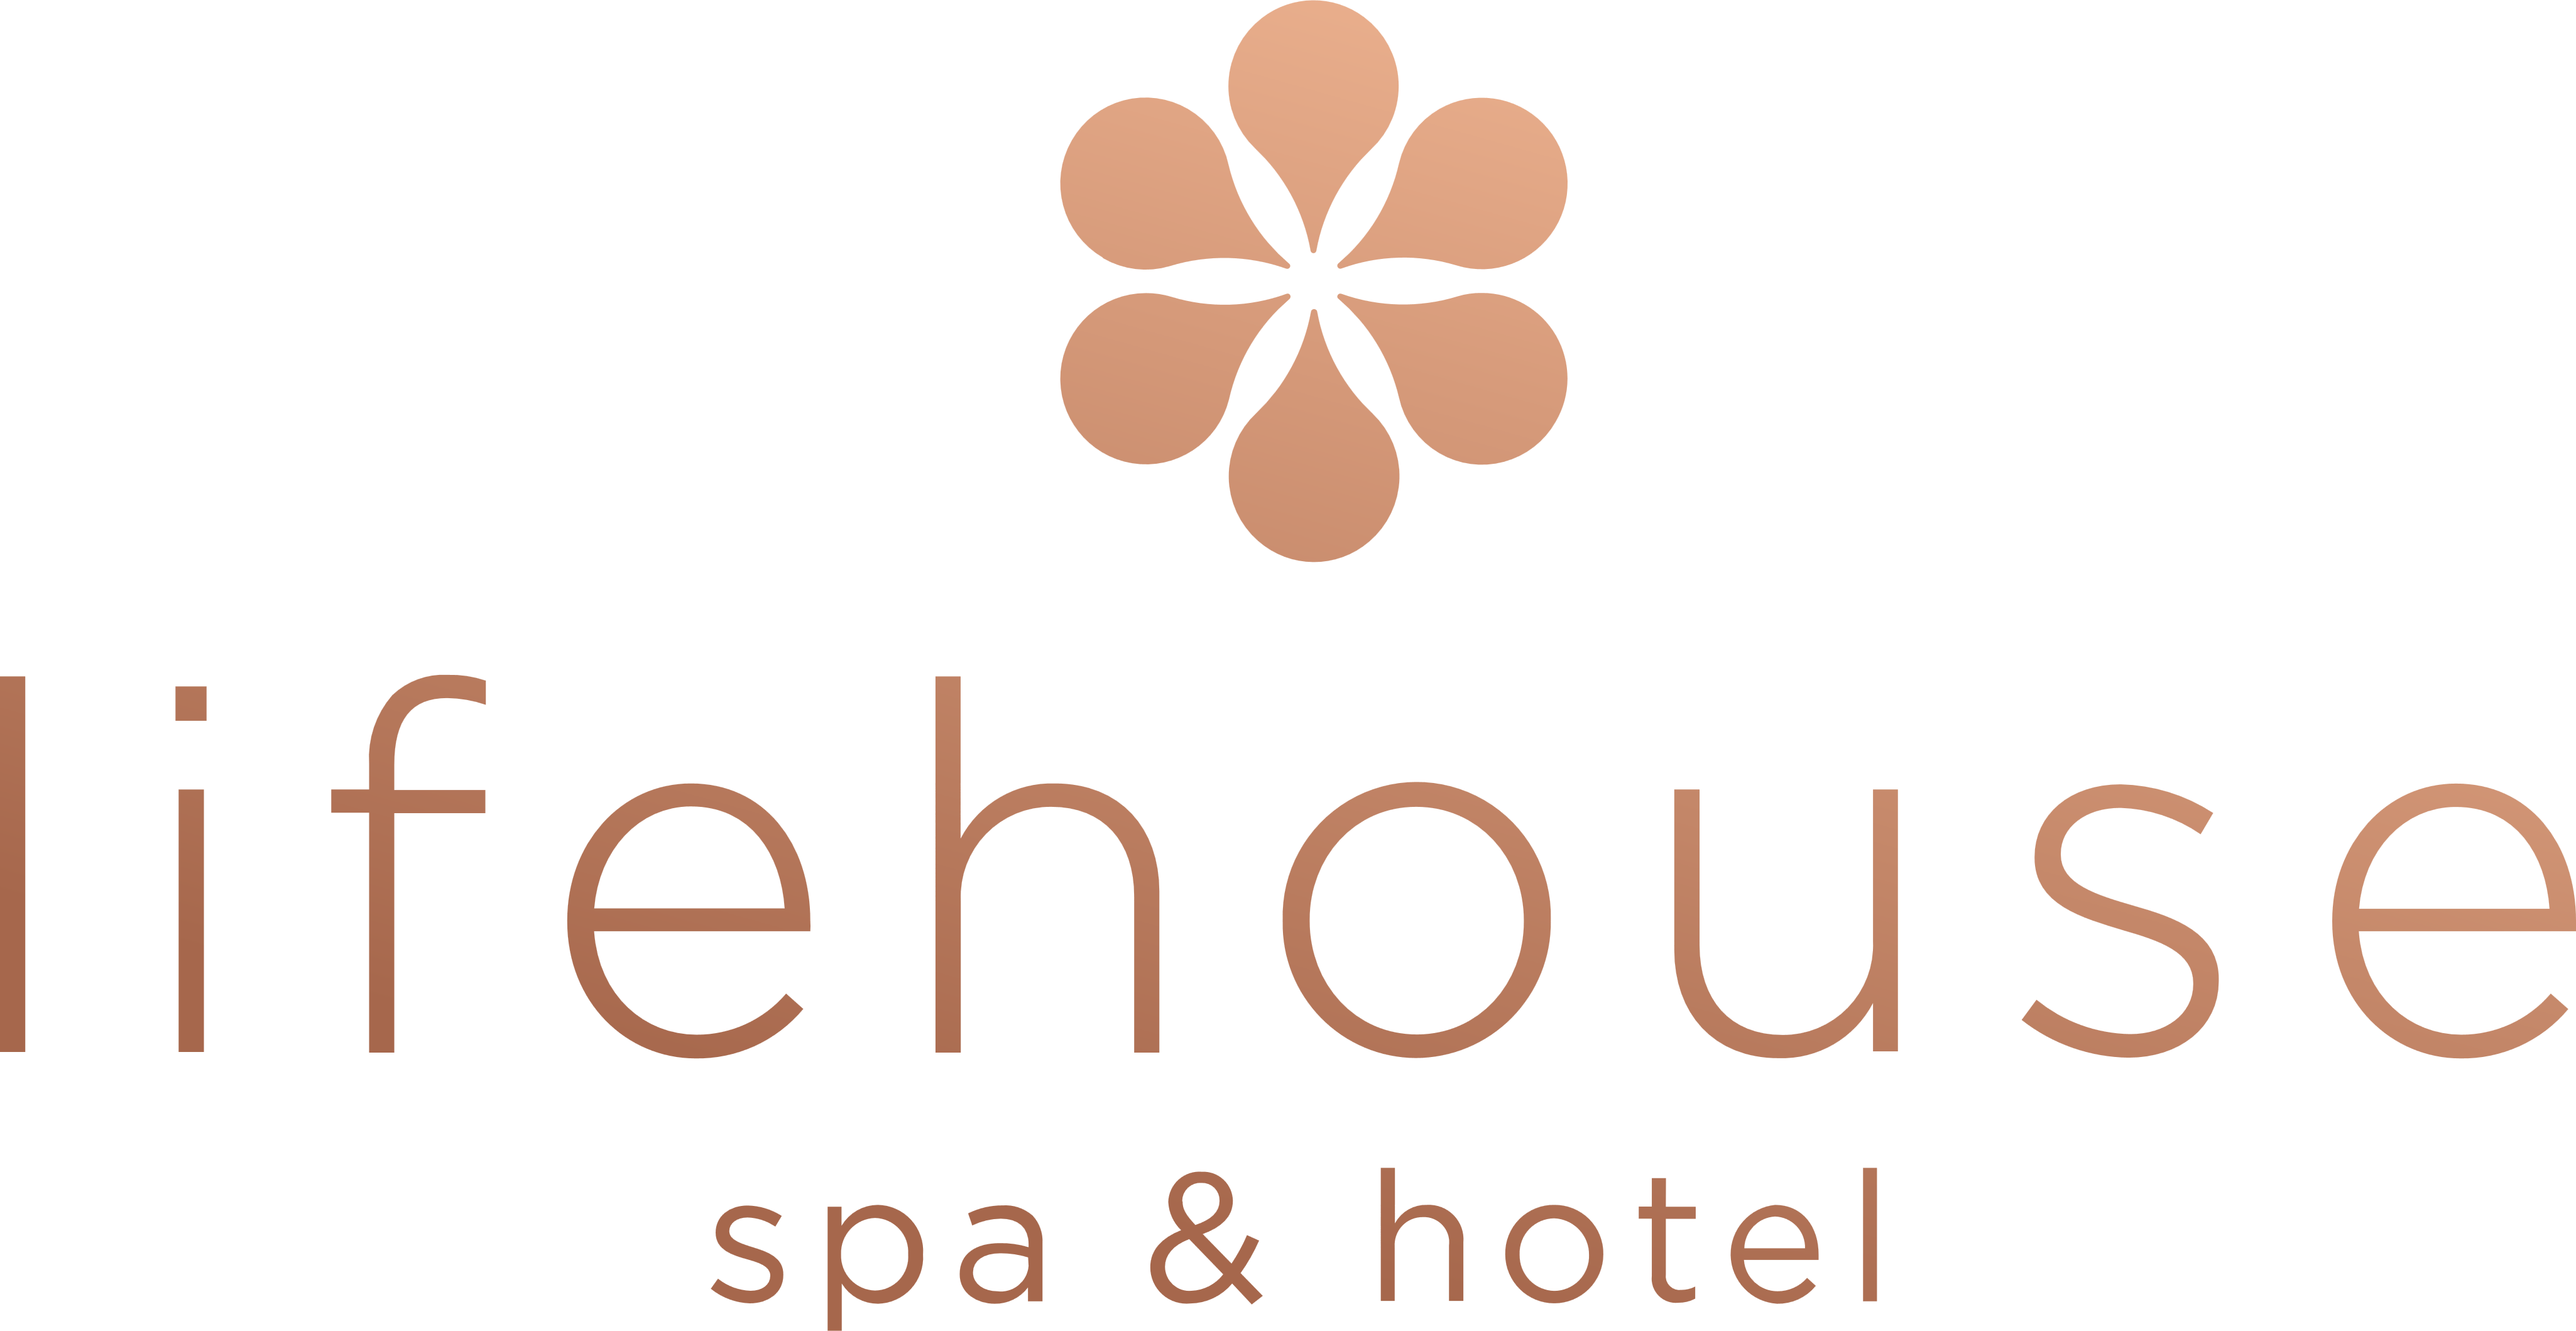 lifehouse spa & hotel logo picture #41827